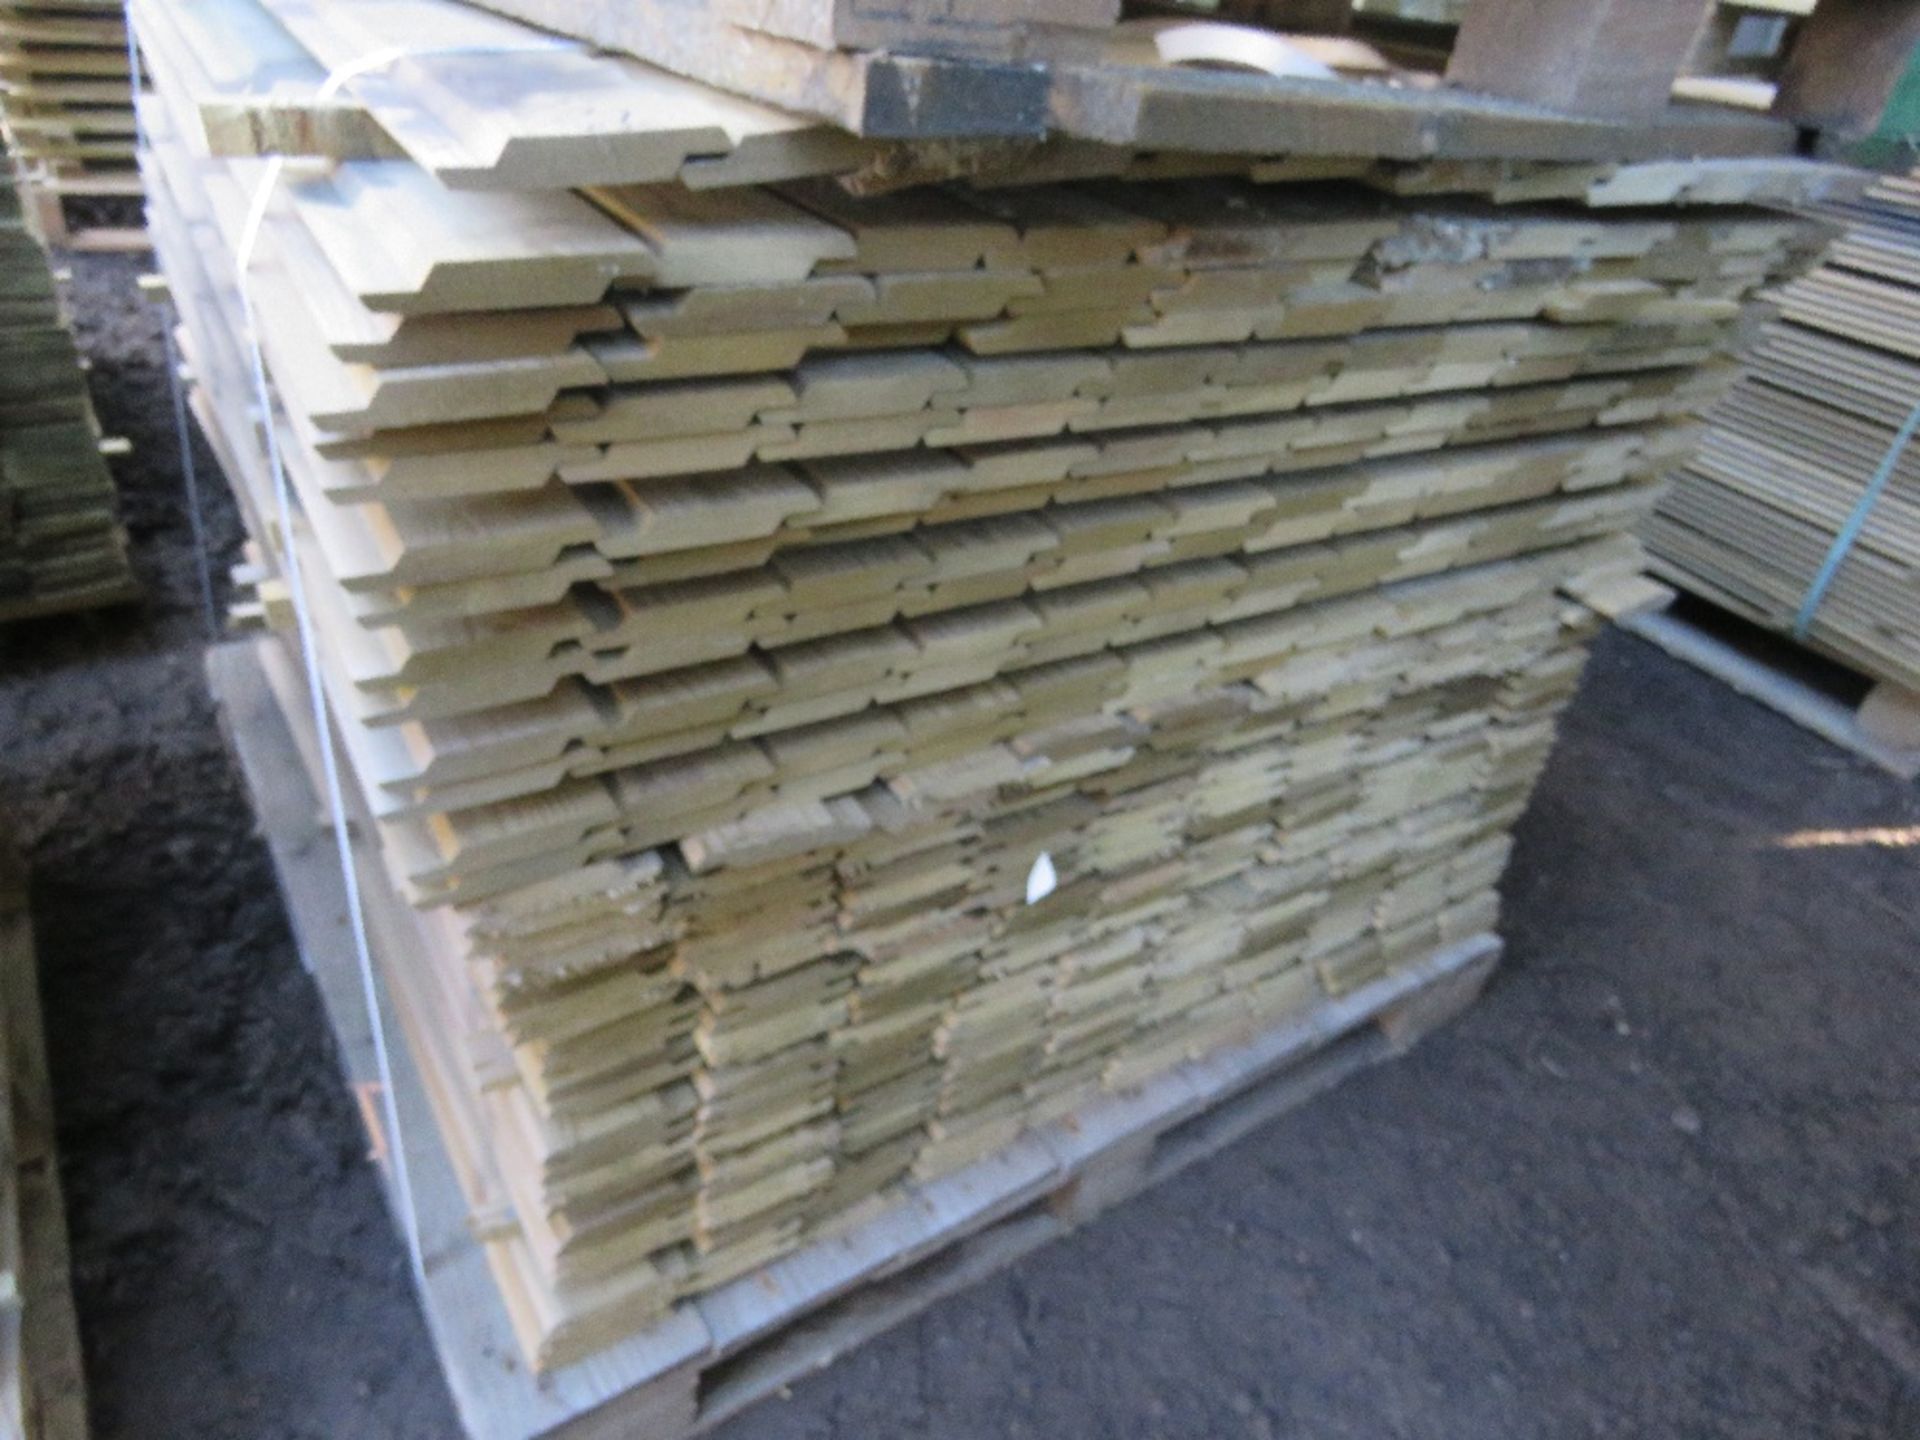 2 X PALLETS OF SHIPLAP PRESSURE TREATED FENCE CLADDING TIMBER BOARDS. 1.M-1.05M LENGTH X 95MM WIDTH - Image 3 of 4